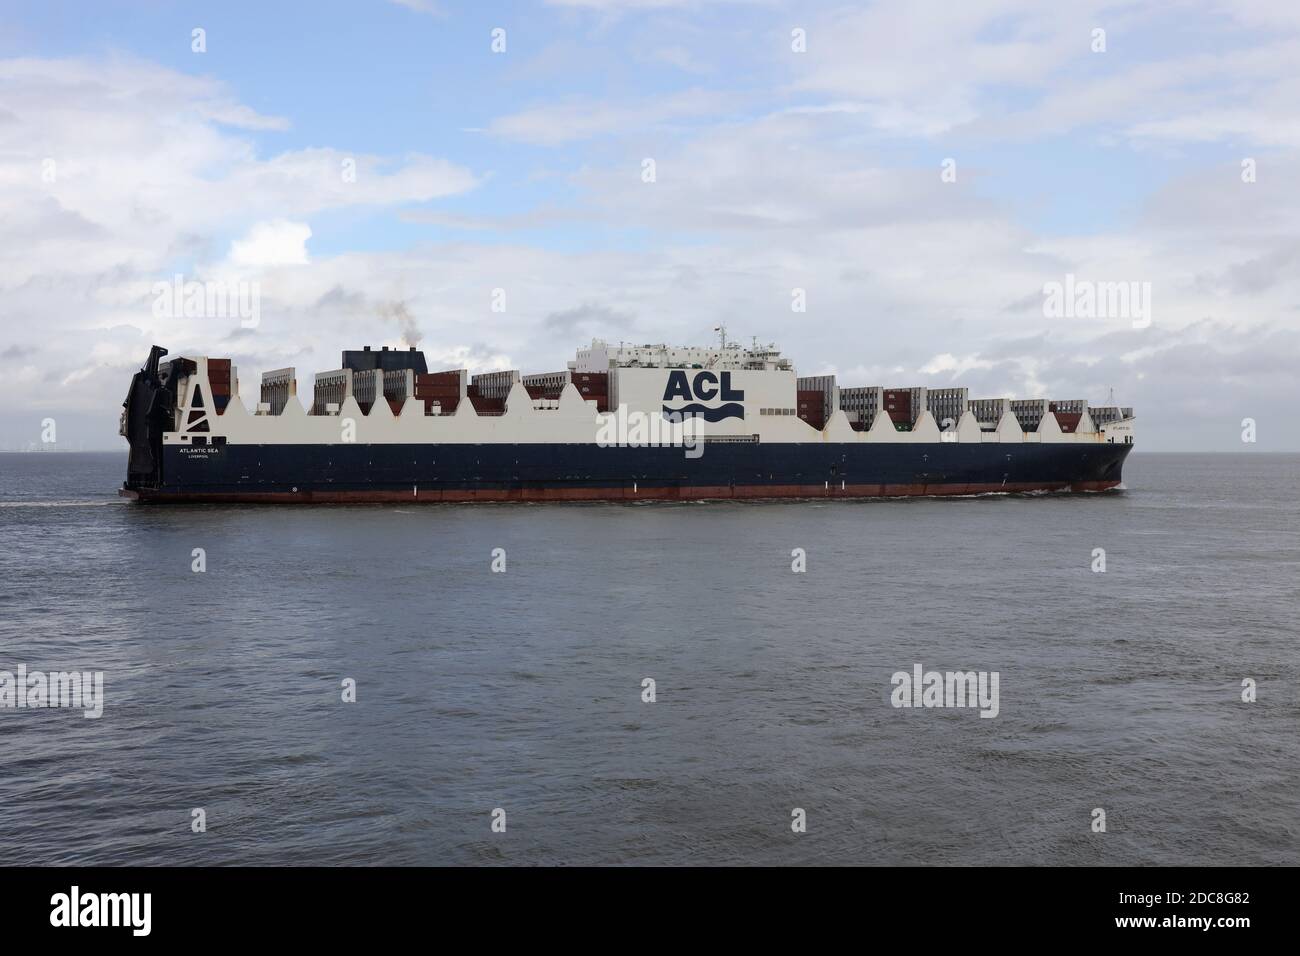 The Con-Ro ship Atlantic Sea will pass Cuxhaven on August 23, 2020 on its way to Hamburg. Stock Photo